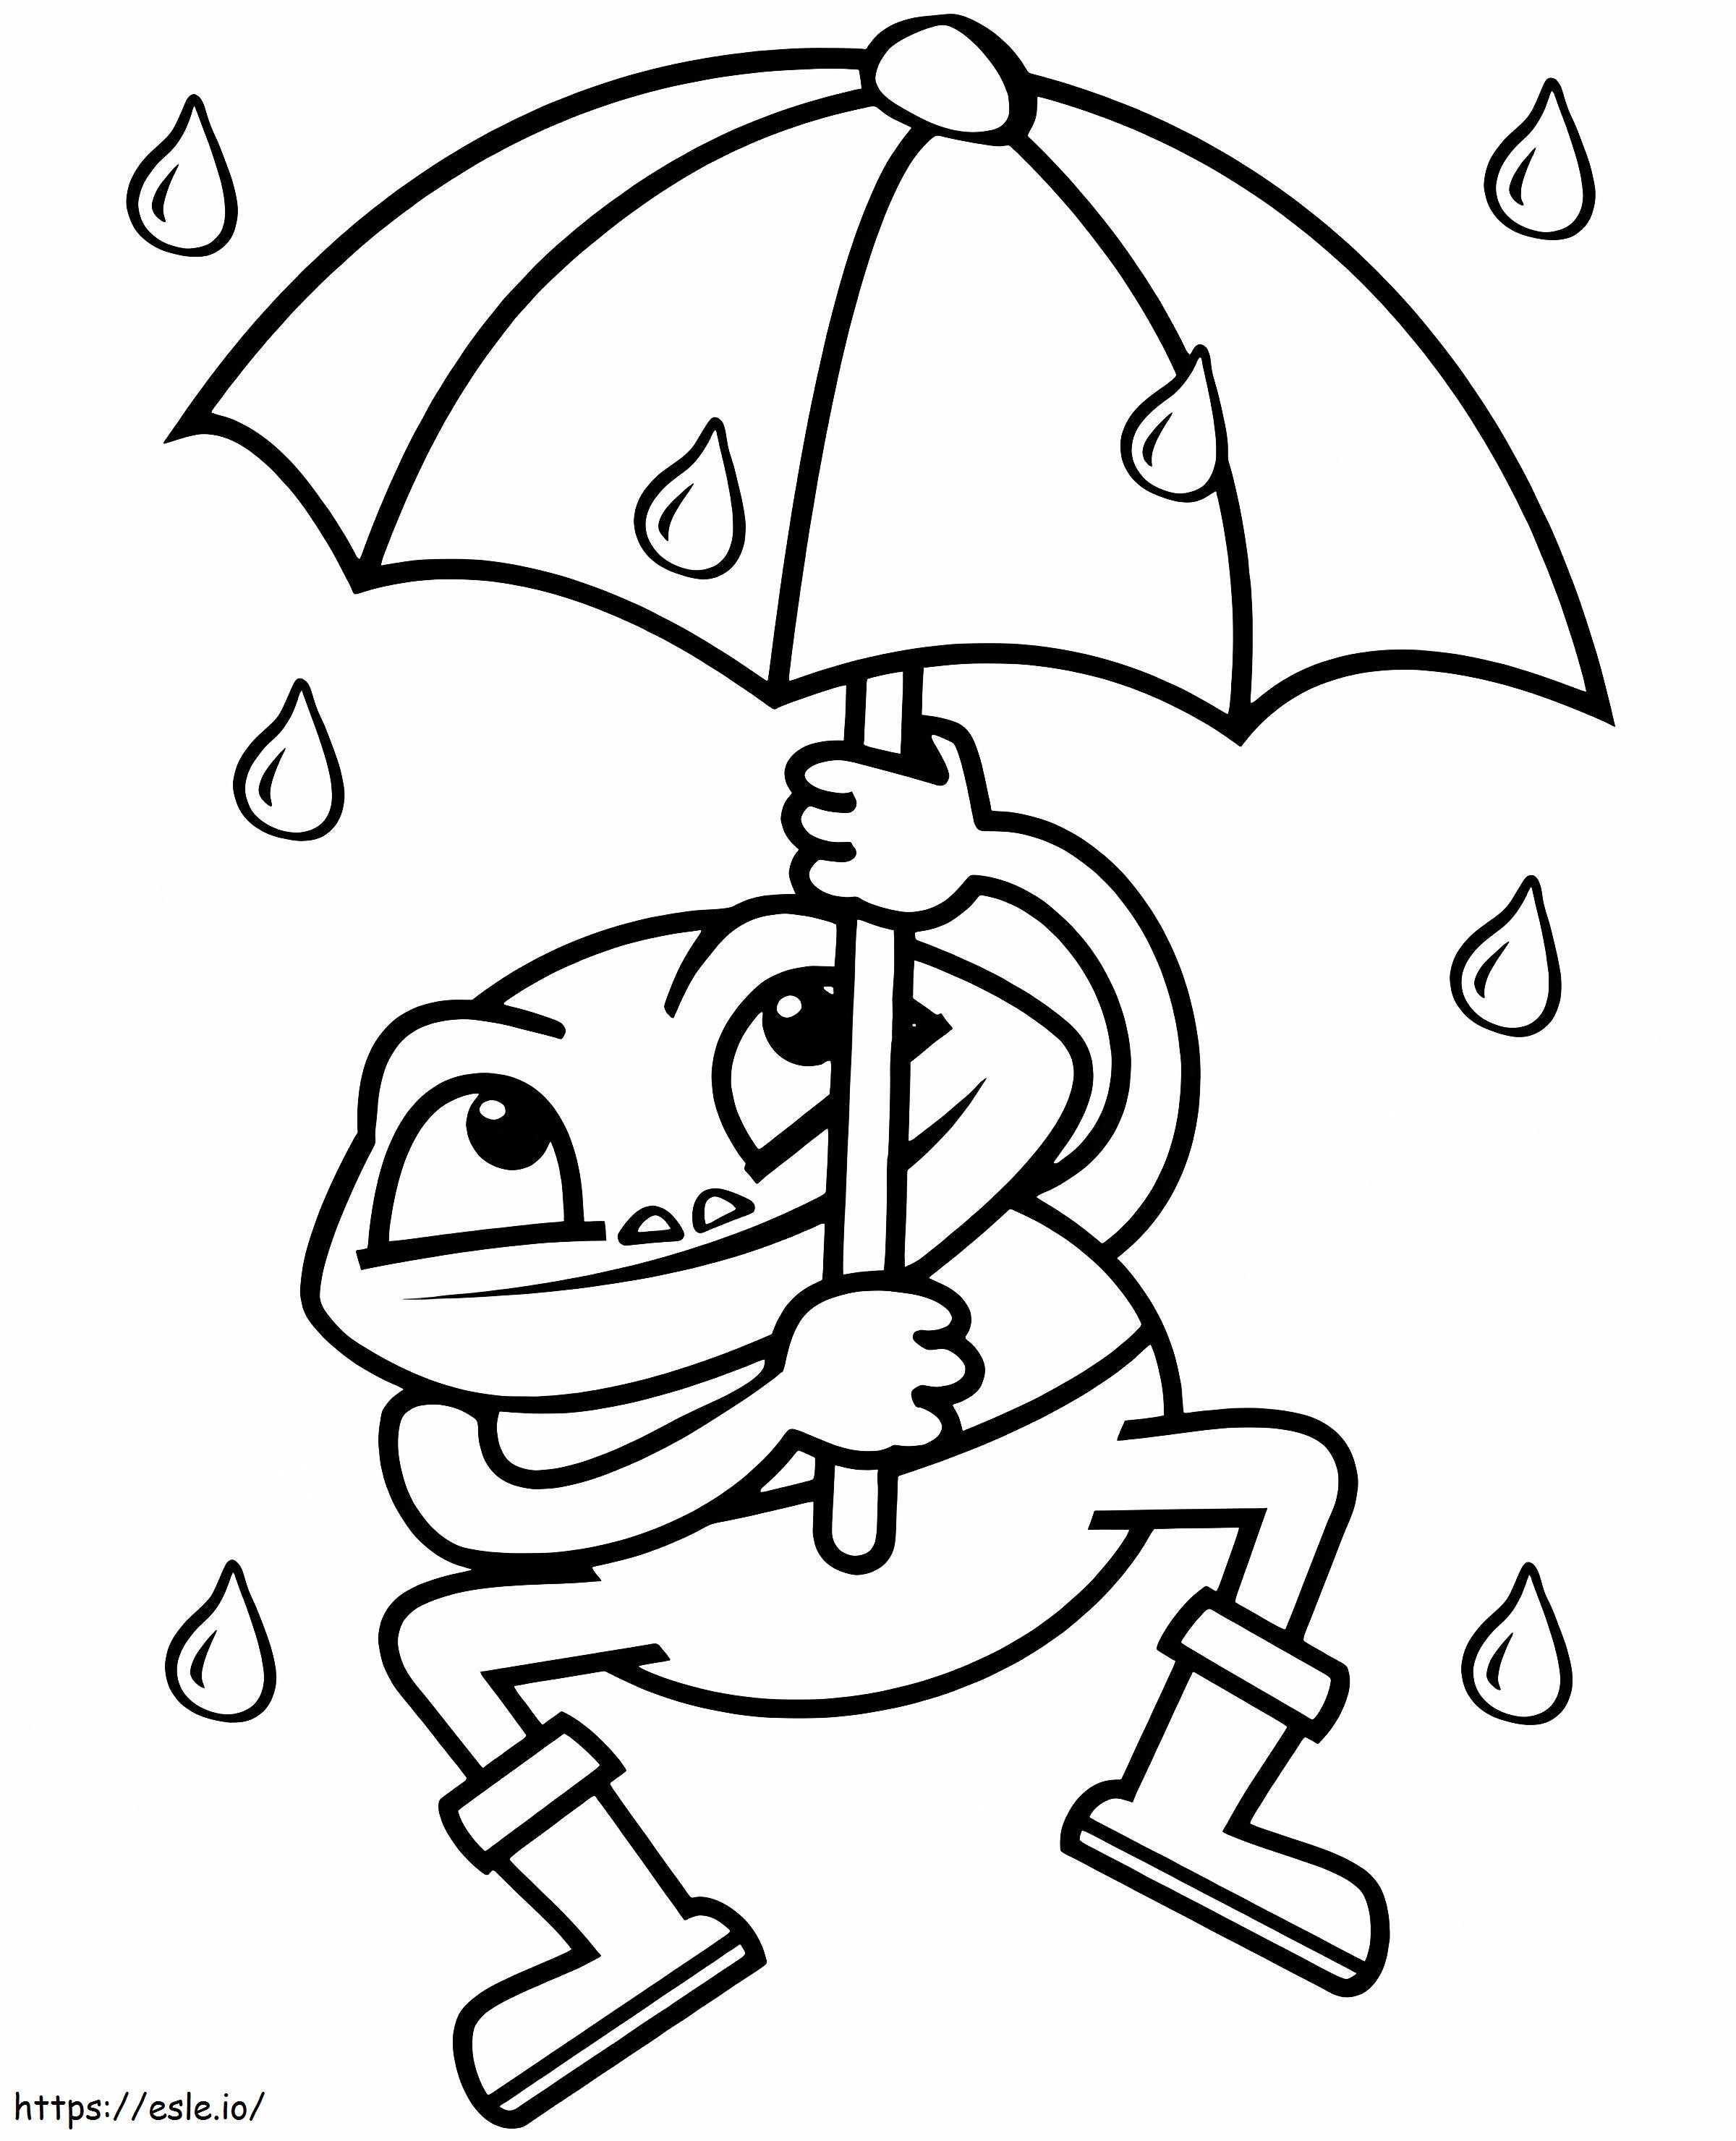 Frog Holding Umbrella coloring page